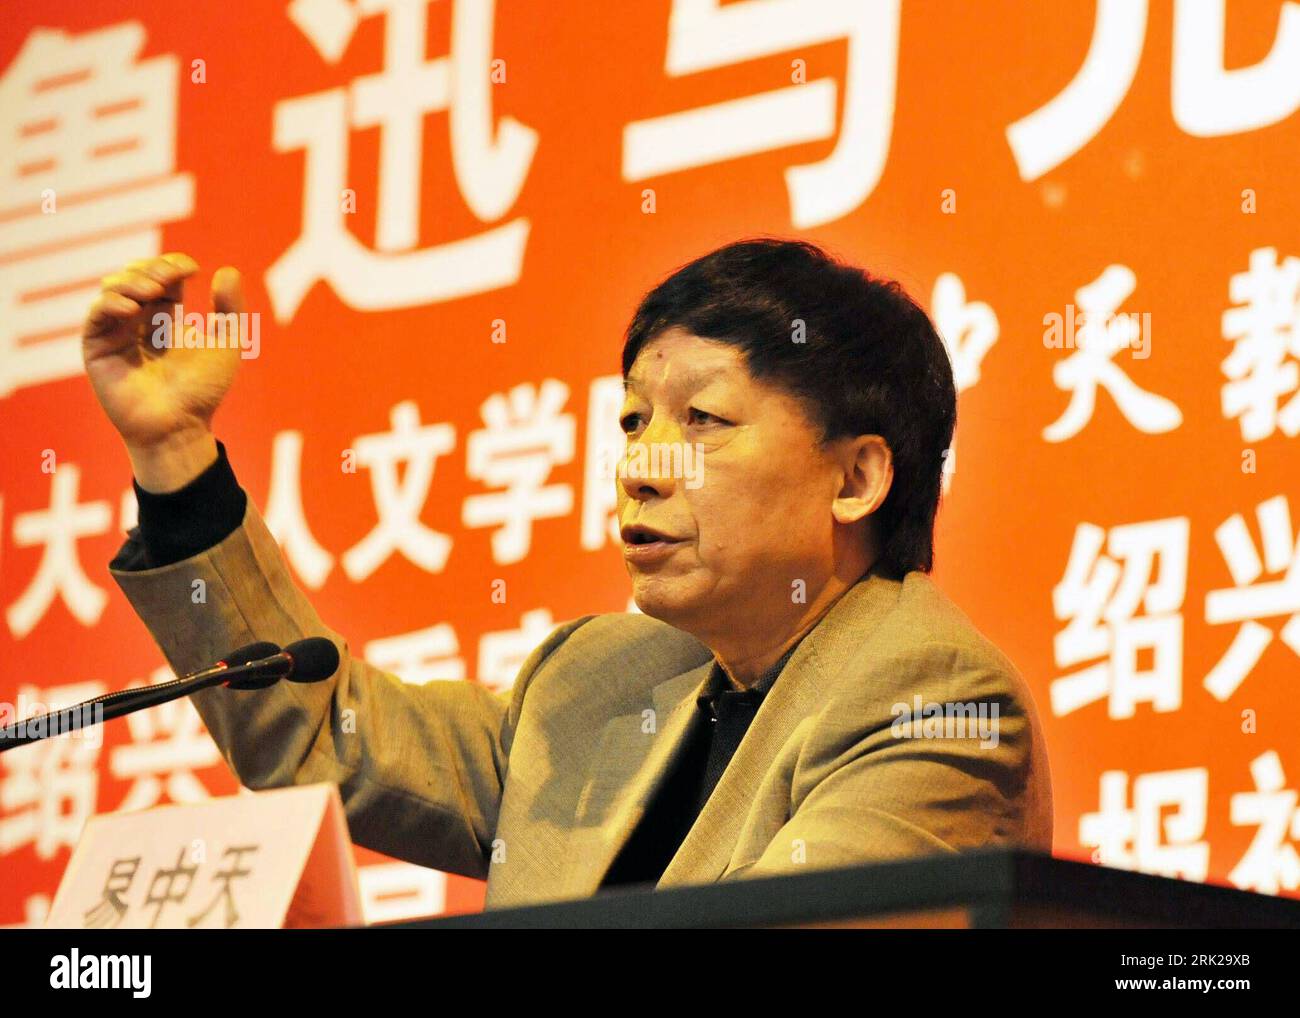 Bildnummer: 53154622  Datum: 29.03.2009  Copyright: imago/Xinhua  Yi Zhongtian, a professor with the Xiamen Univeristy and a currently popular TV lecturer, imparts on a topic of Lu Xun and Philosophic Thinkers of Various Schools of Pre-Qin Dynasties, in Shaoxing, east China s Zhejiang Province, March 28, 2009.       kbdig   People, Wissenschaft quer    Image number 53154622 Date 29 03 2009 Copyright Imago XINHUA Yi Zhongtian a Professor With The Xiamen University and a currently Popular TV lecturer imparts ON a Topic of Lu Xun and Philosophic Thinkers of Various Schools of Pre Qin Dynasties in Stock Photo